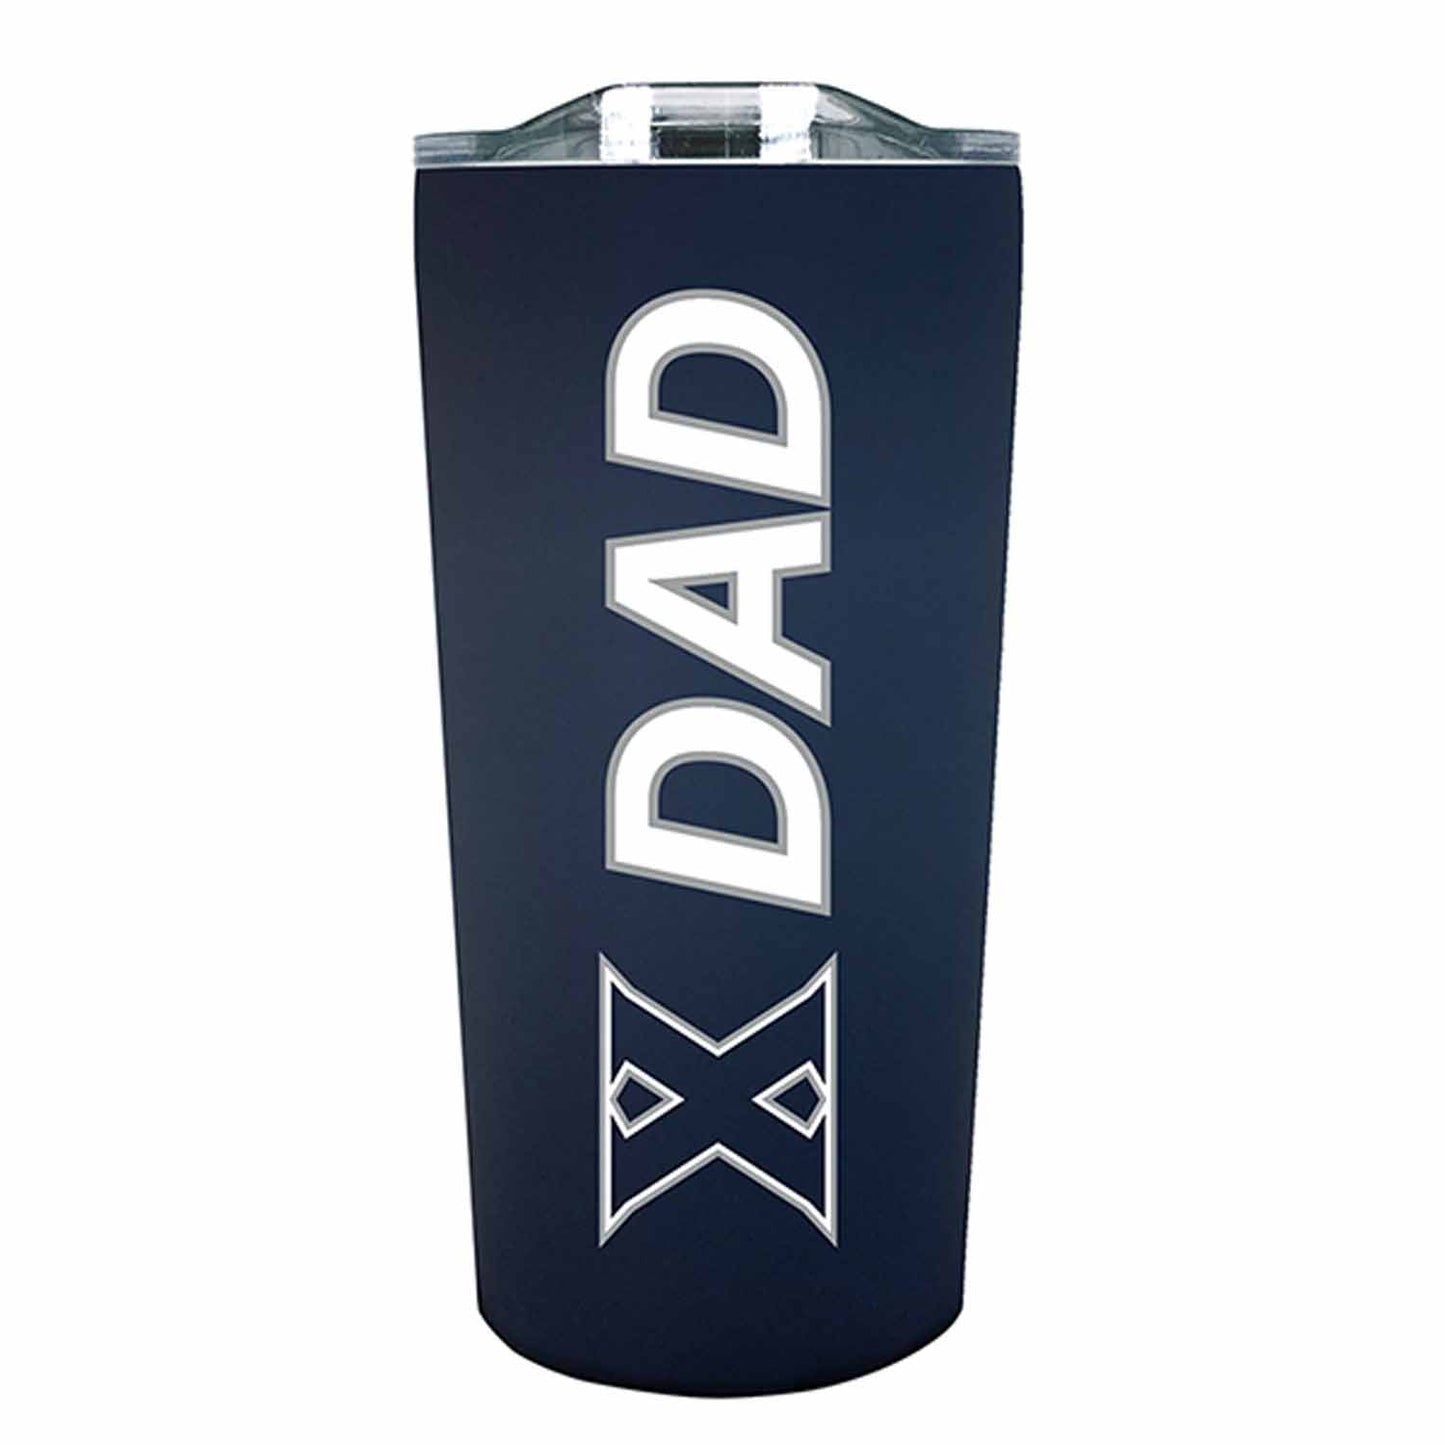 Xavier Musketeers NCAA Stainless Steel Travel Tumbler for Dad - Navy